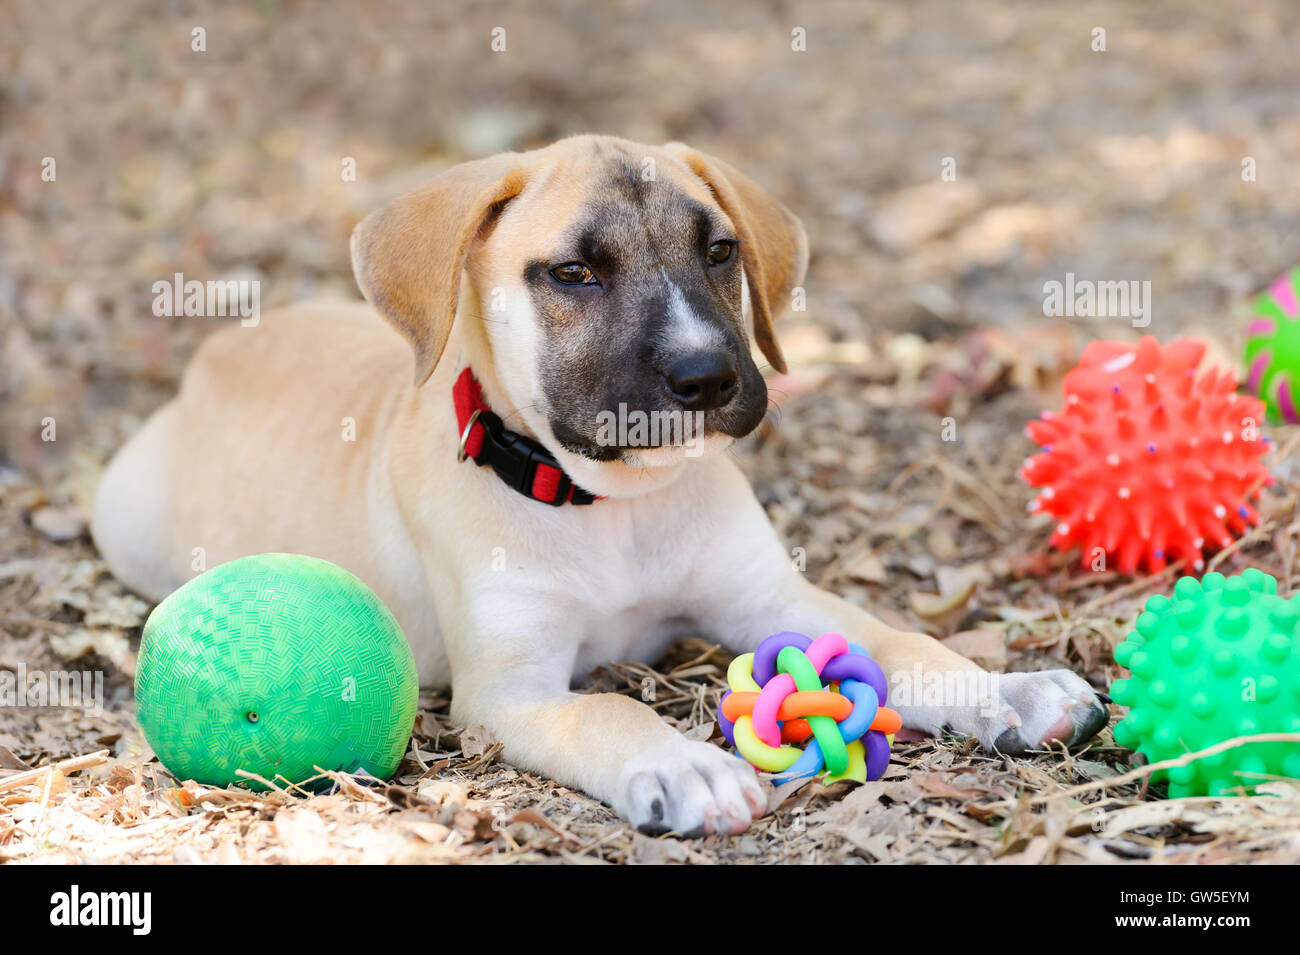 Dog toys is a cute happy adorable puppy playing with his toys outdoors. Stock Photo